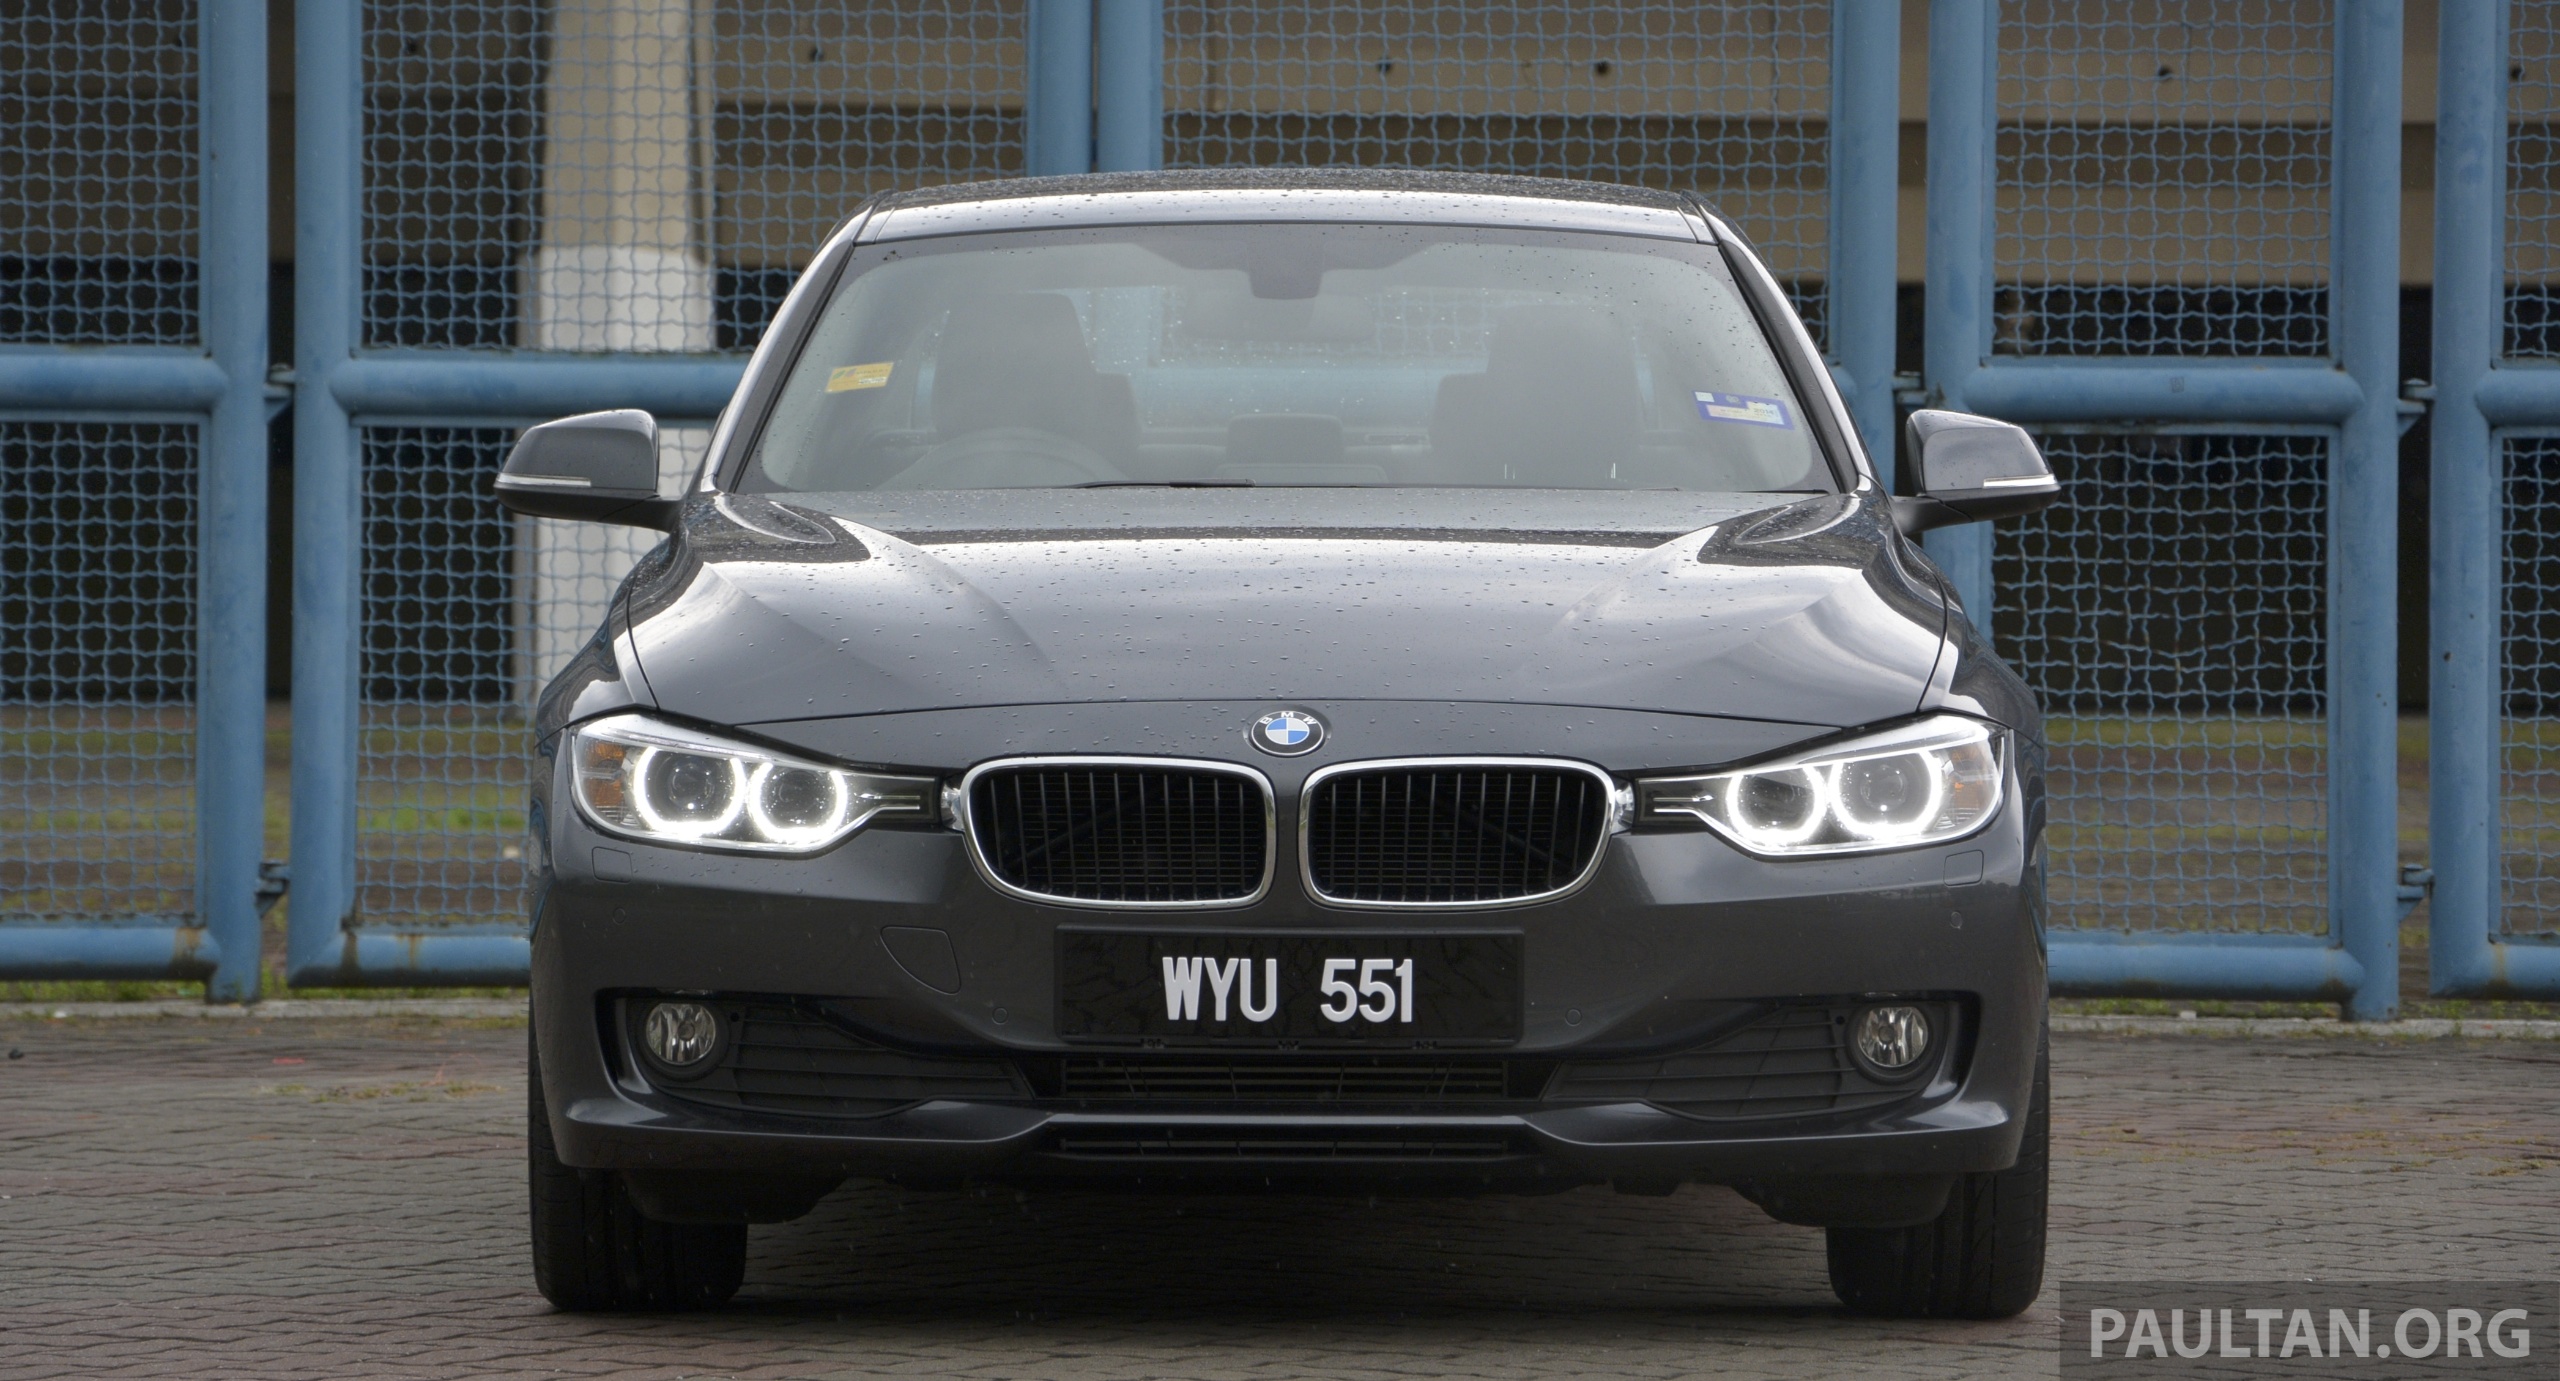 The new bmw 316i 2013 #7